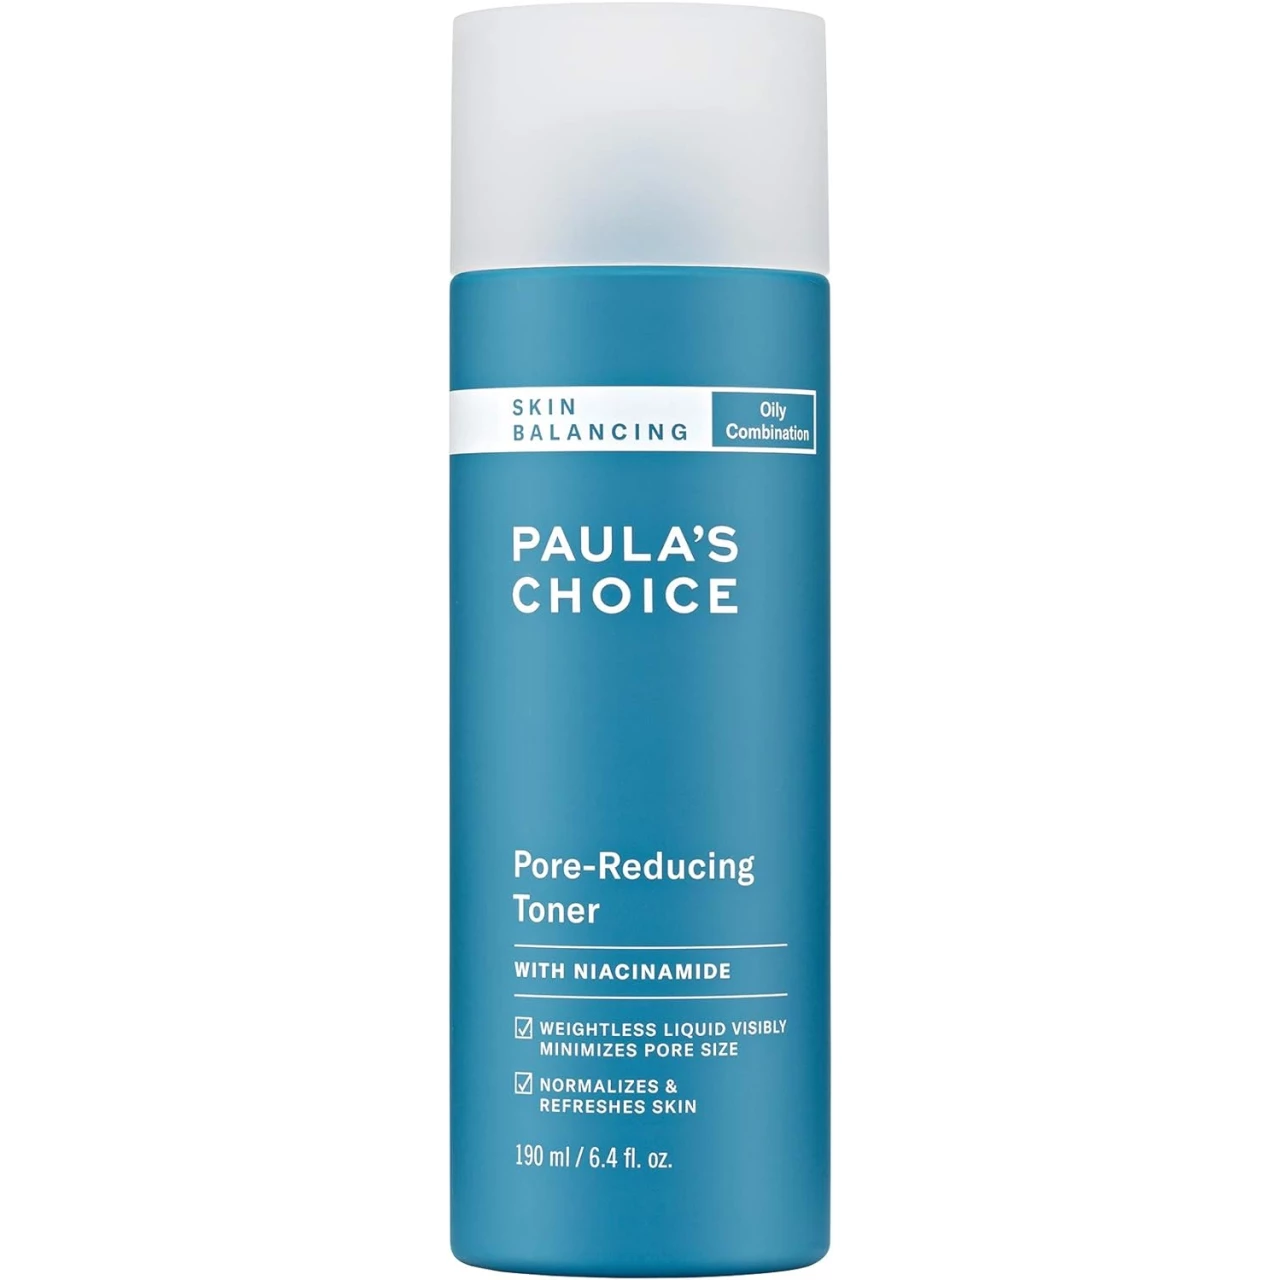 Paula&rsquo;s Choice Skin Balancing Pore-Reducing Toner for Combination and Oily Skin, Minimizes Large Pores, 6.4 Fluid Ounce Bottle